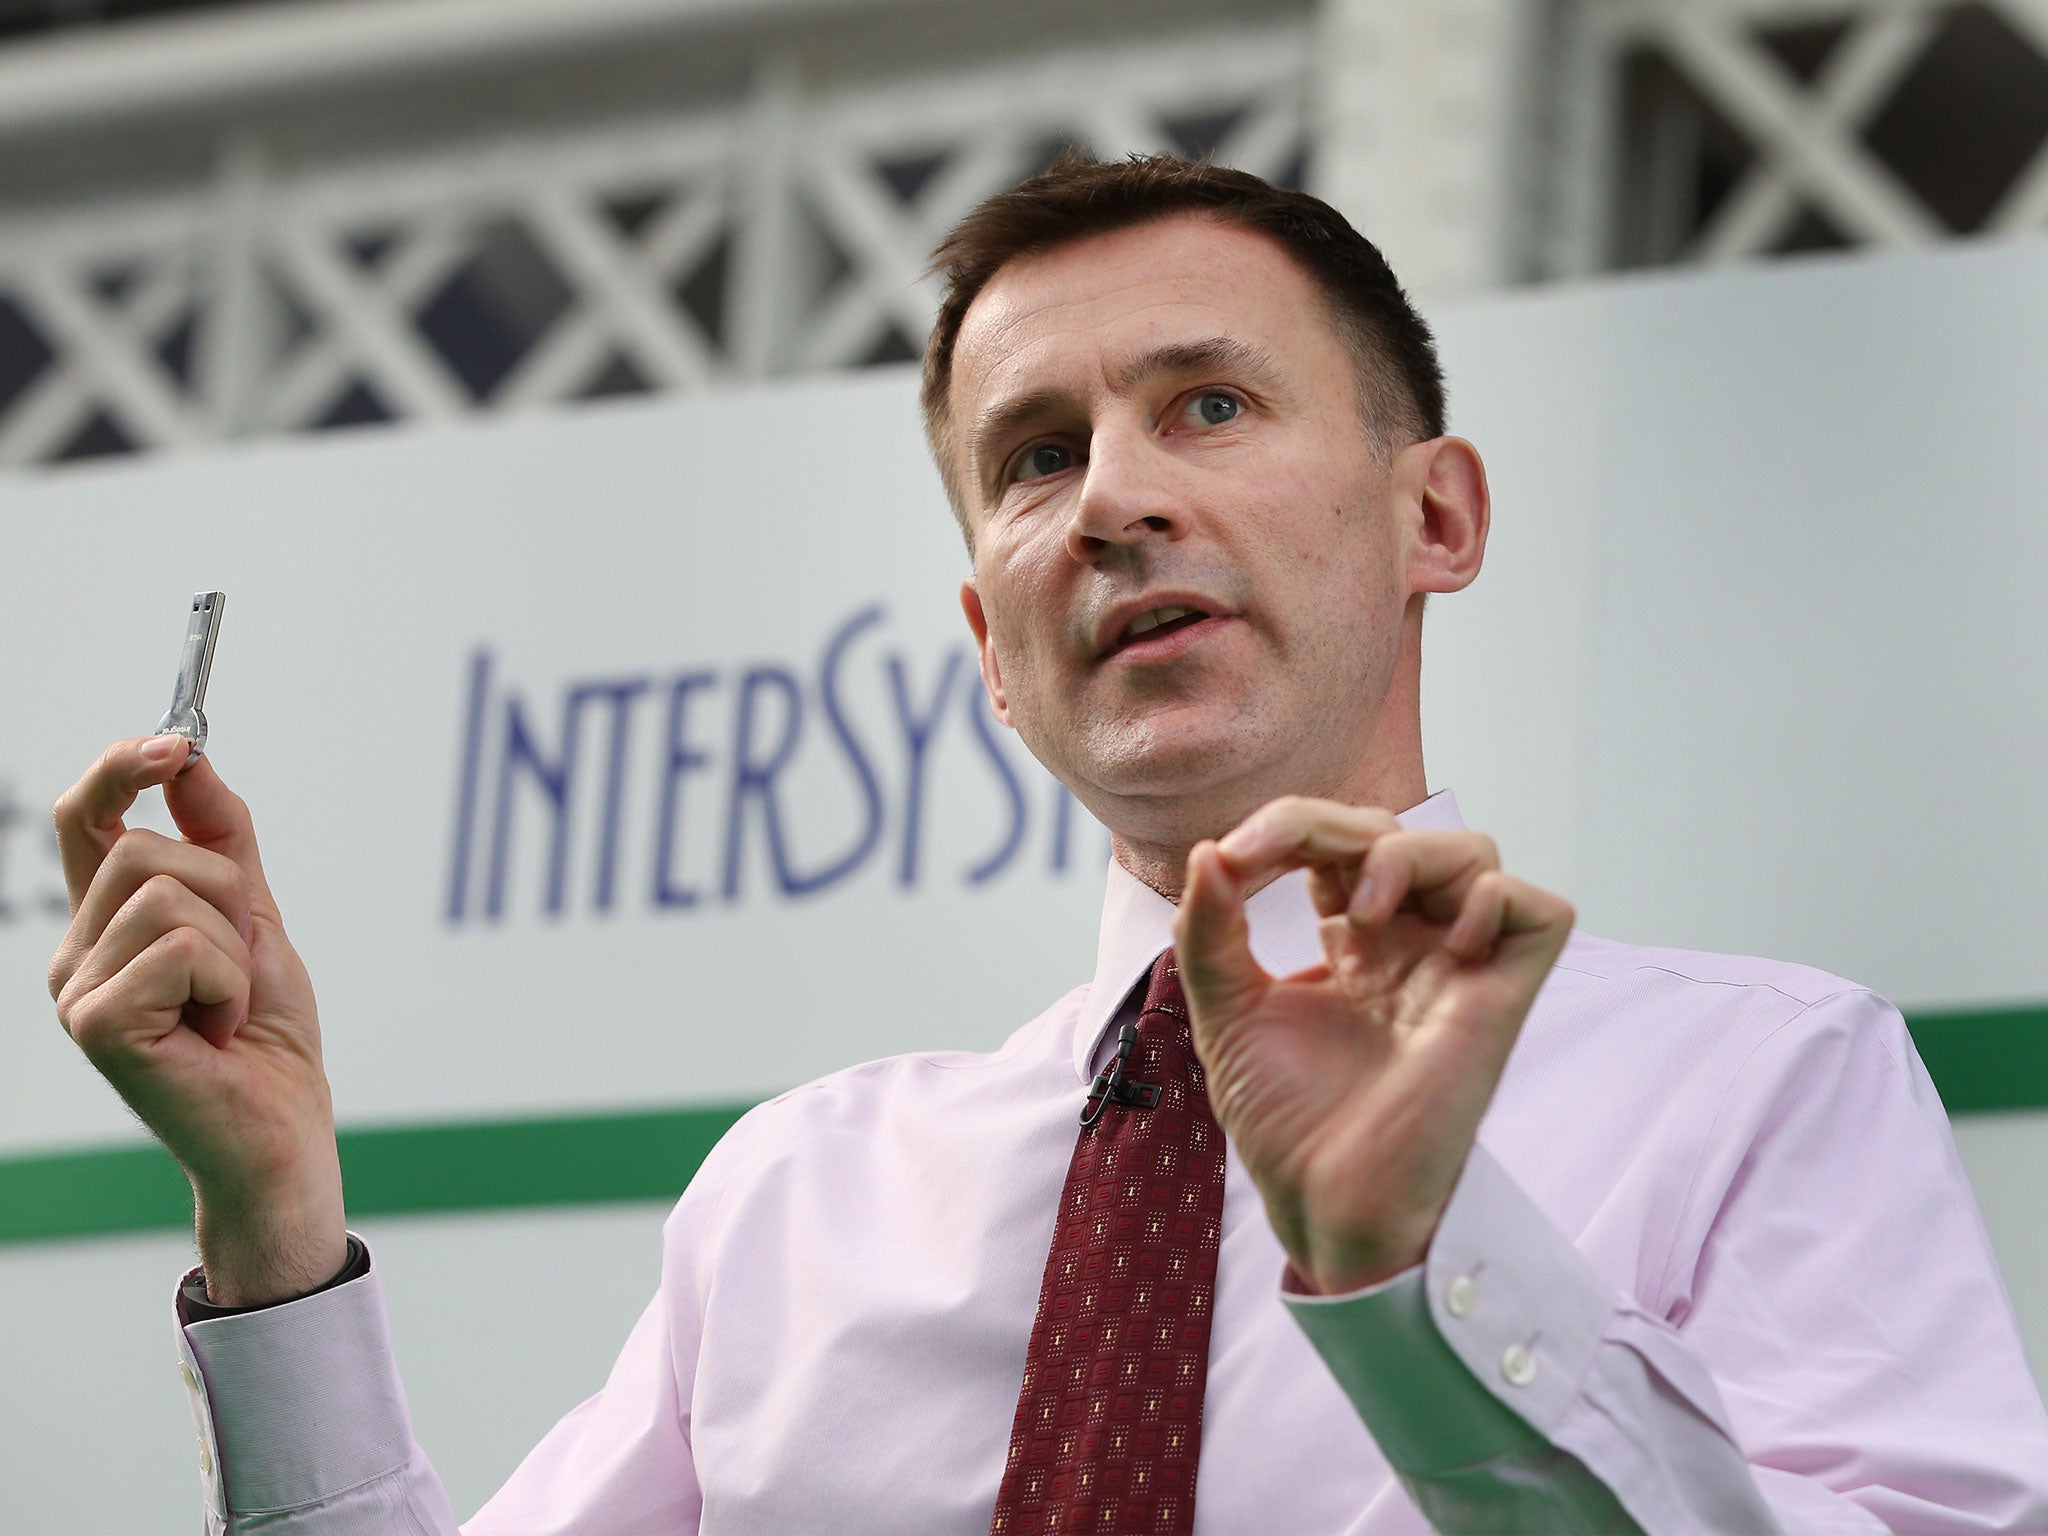 Health Secretary Jeremy Hunt has been accused of undermining his own plan for a 'transparency revolution' in the NHS by refusing to publish a report said to be critical of the Government's handling of the health service